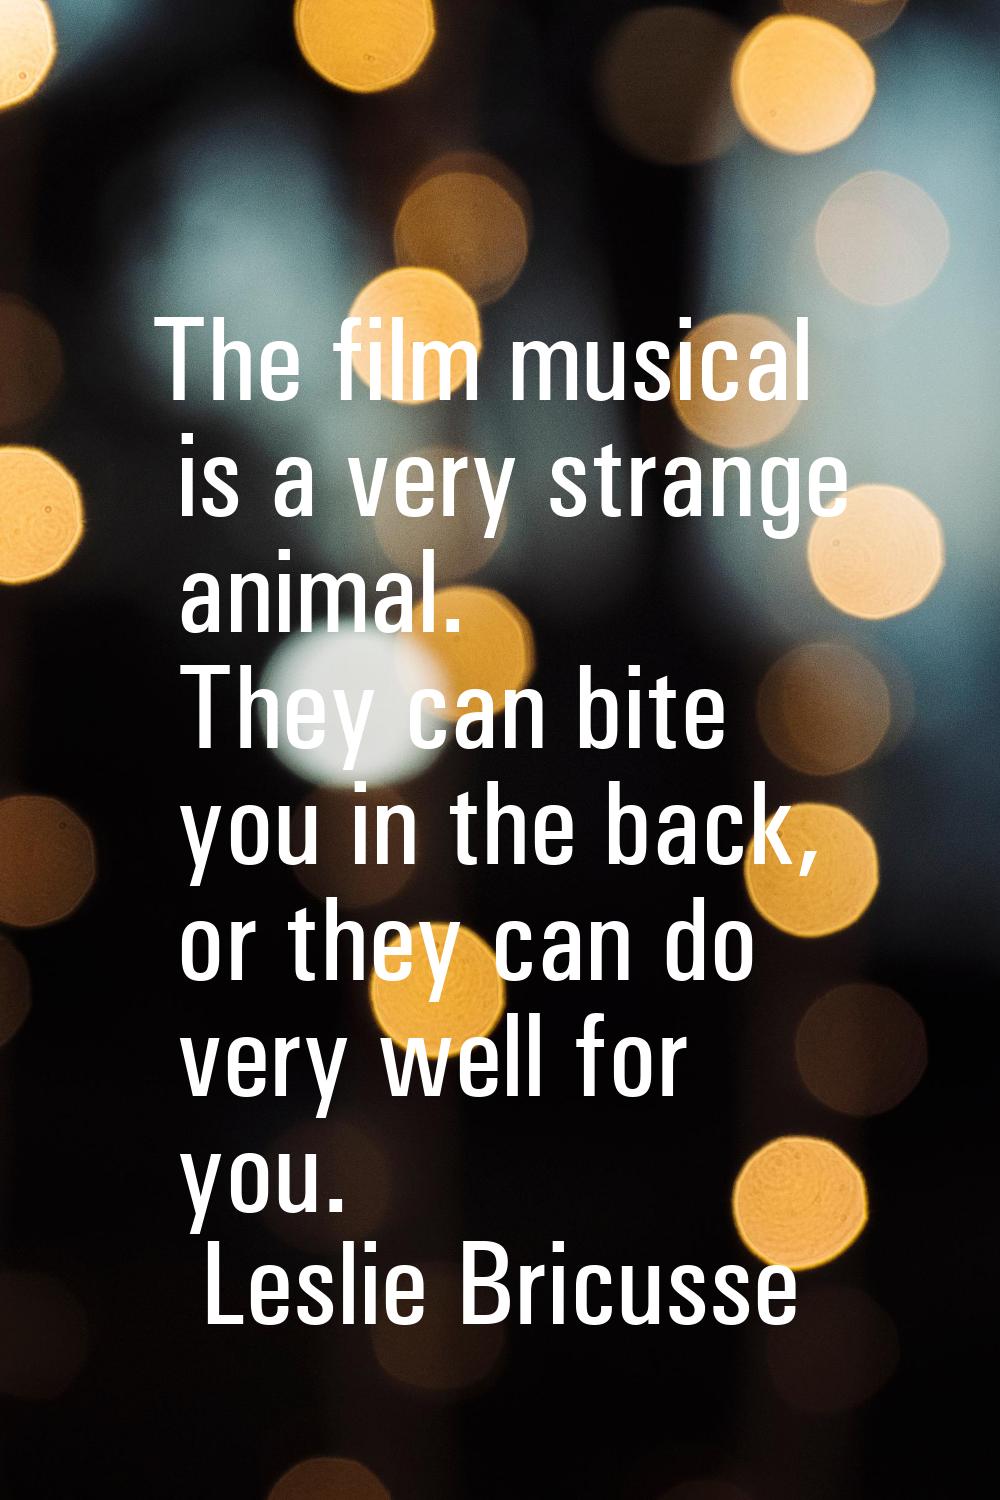 The film musical is a very strange animal. They can bite you in the back, or they can do very well 